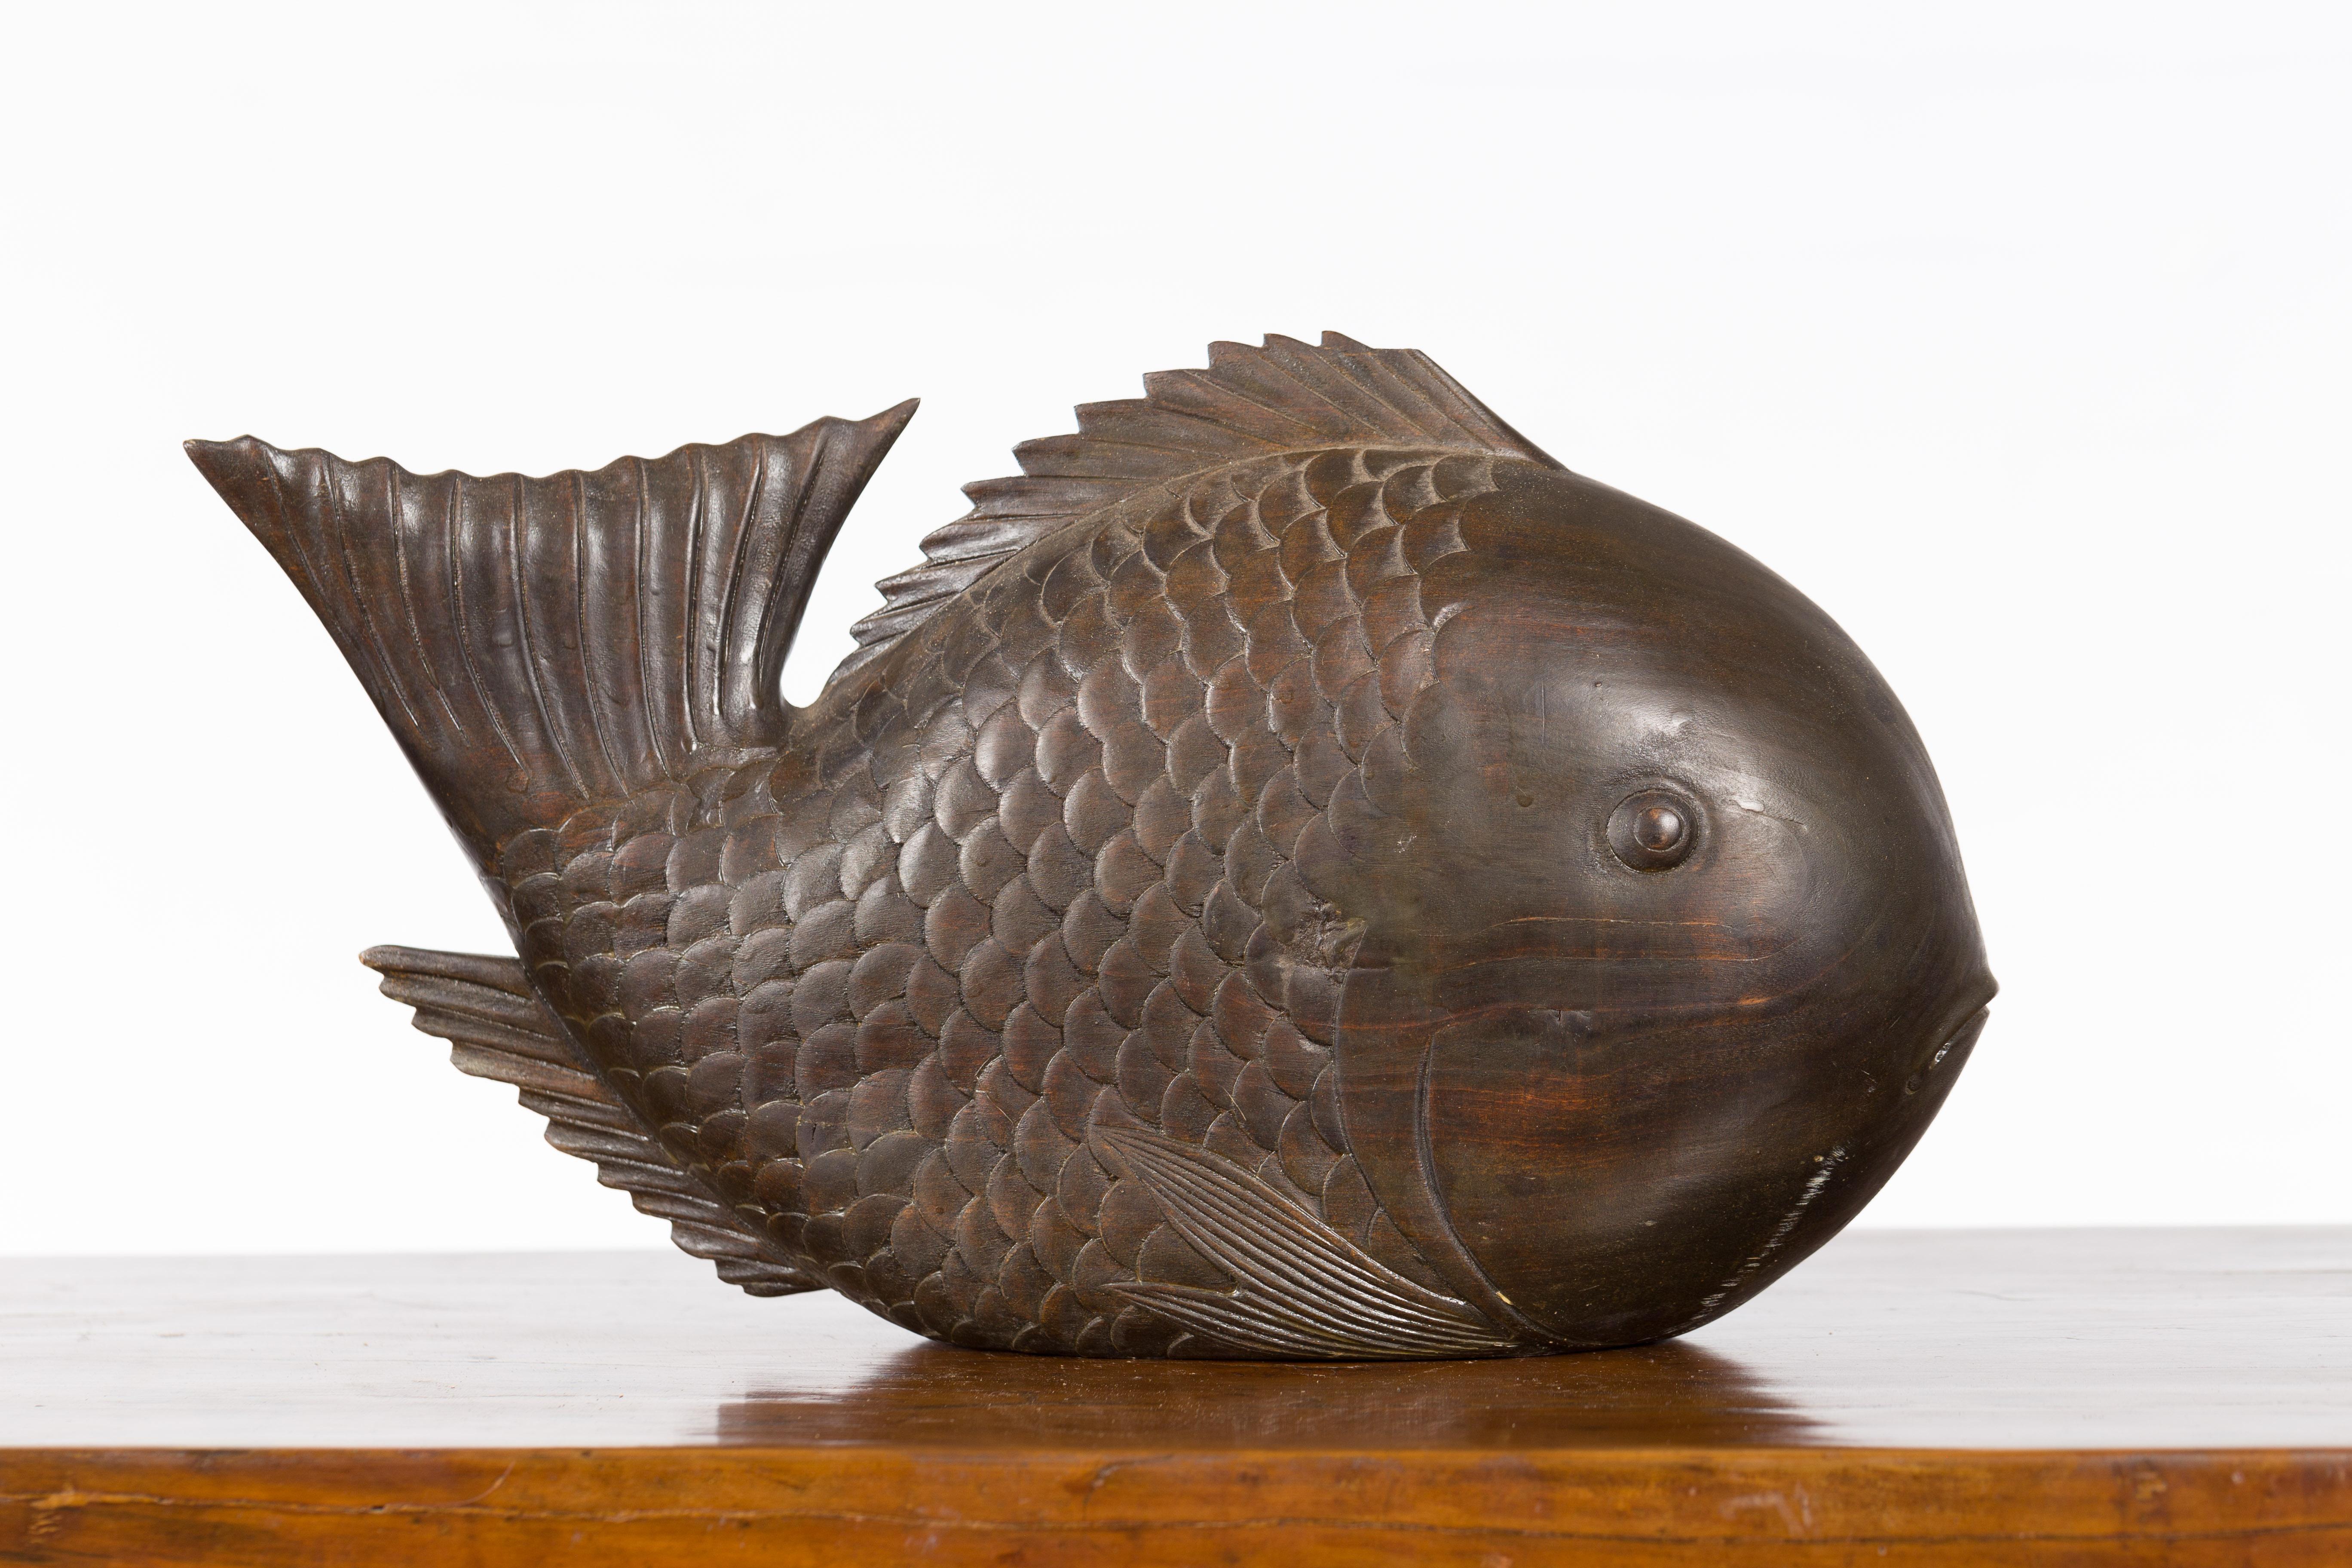 A vintage Thai carved wooden carp from the mid 20th century, with detailed scales and dark patina. We have several available, priced and sold individually. Created in Thailand during the midcentury period, this wooden carp sculpture captures our